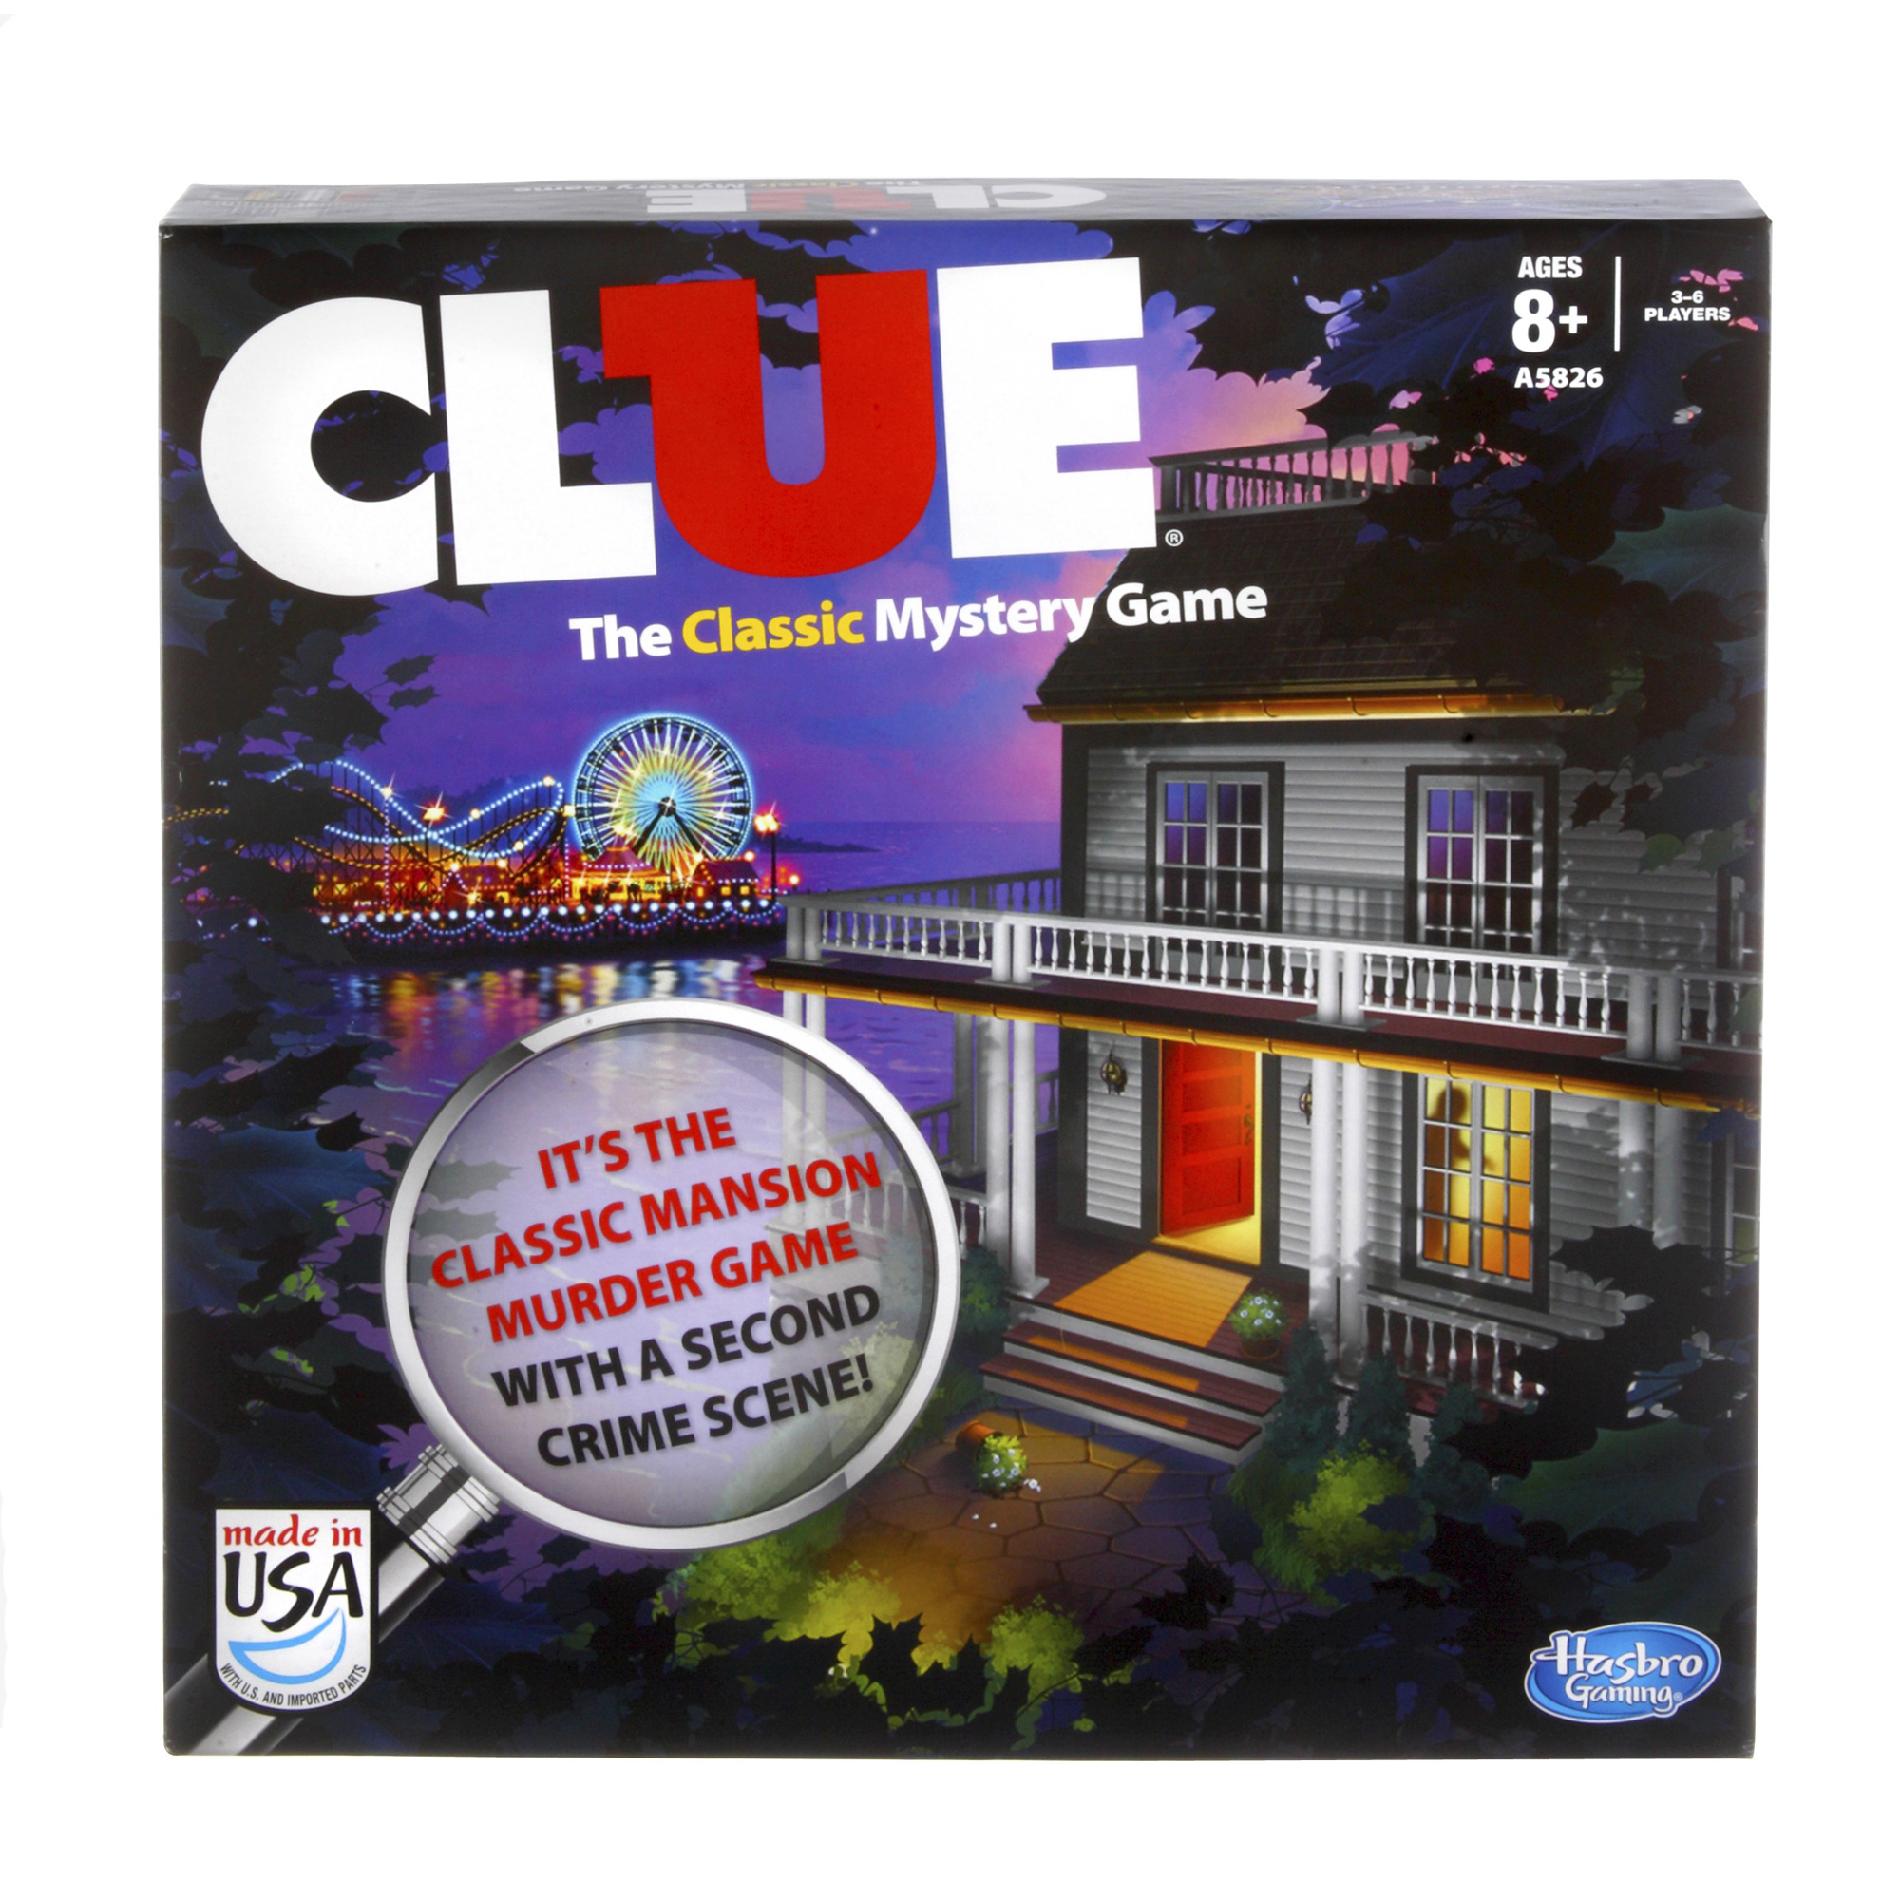 Classic Board Games From $4.99 at Kmart!